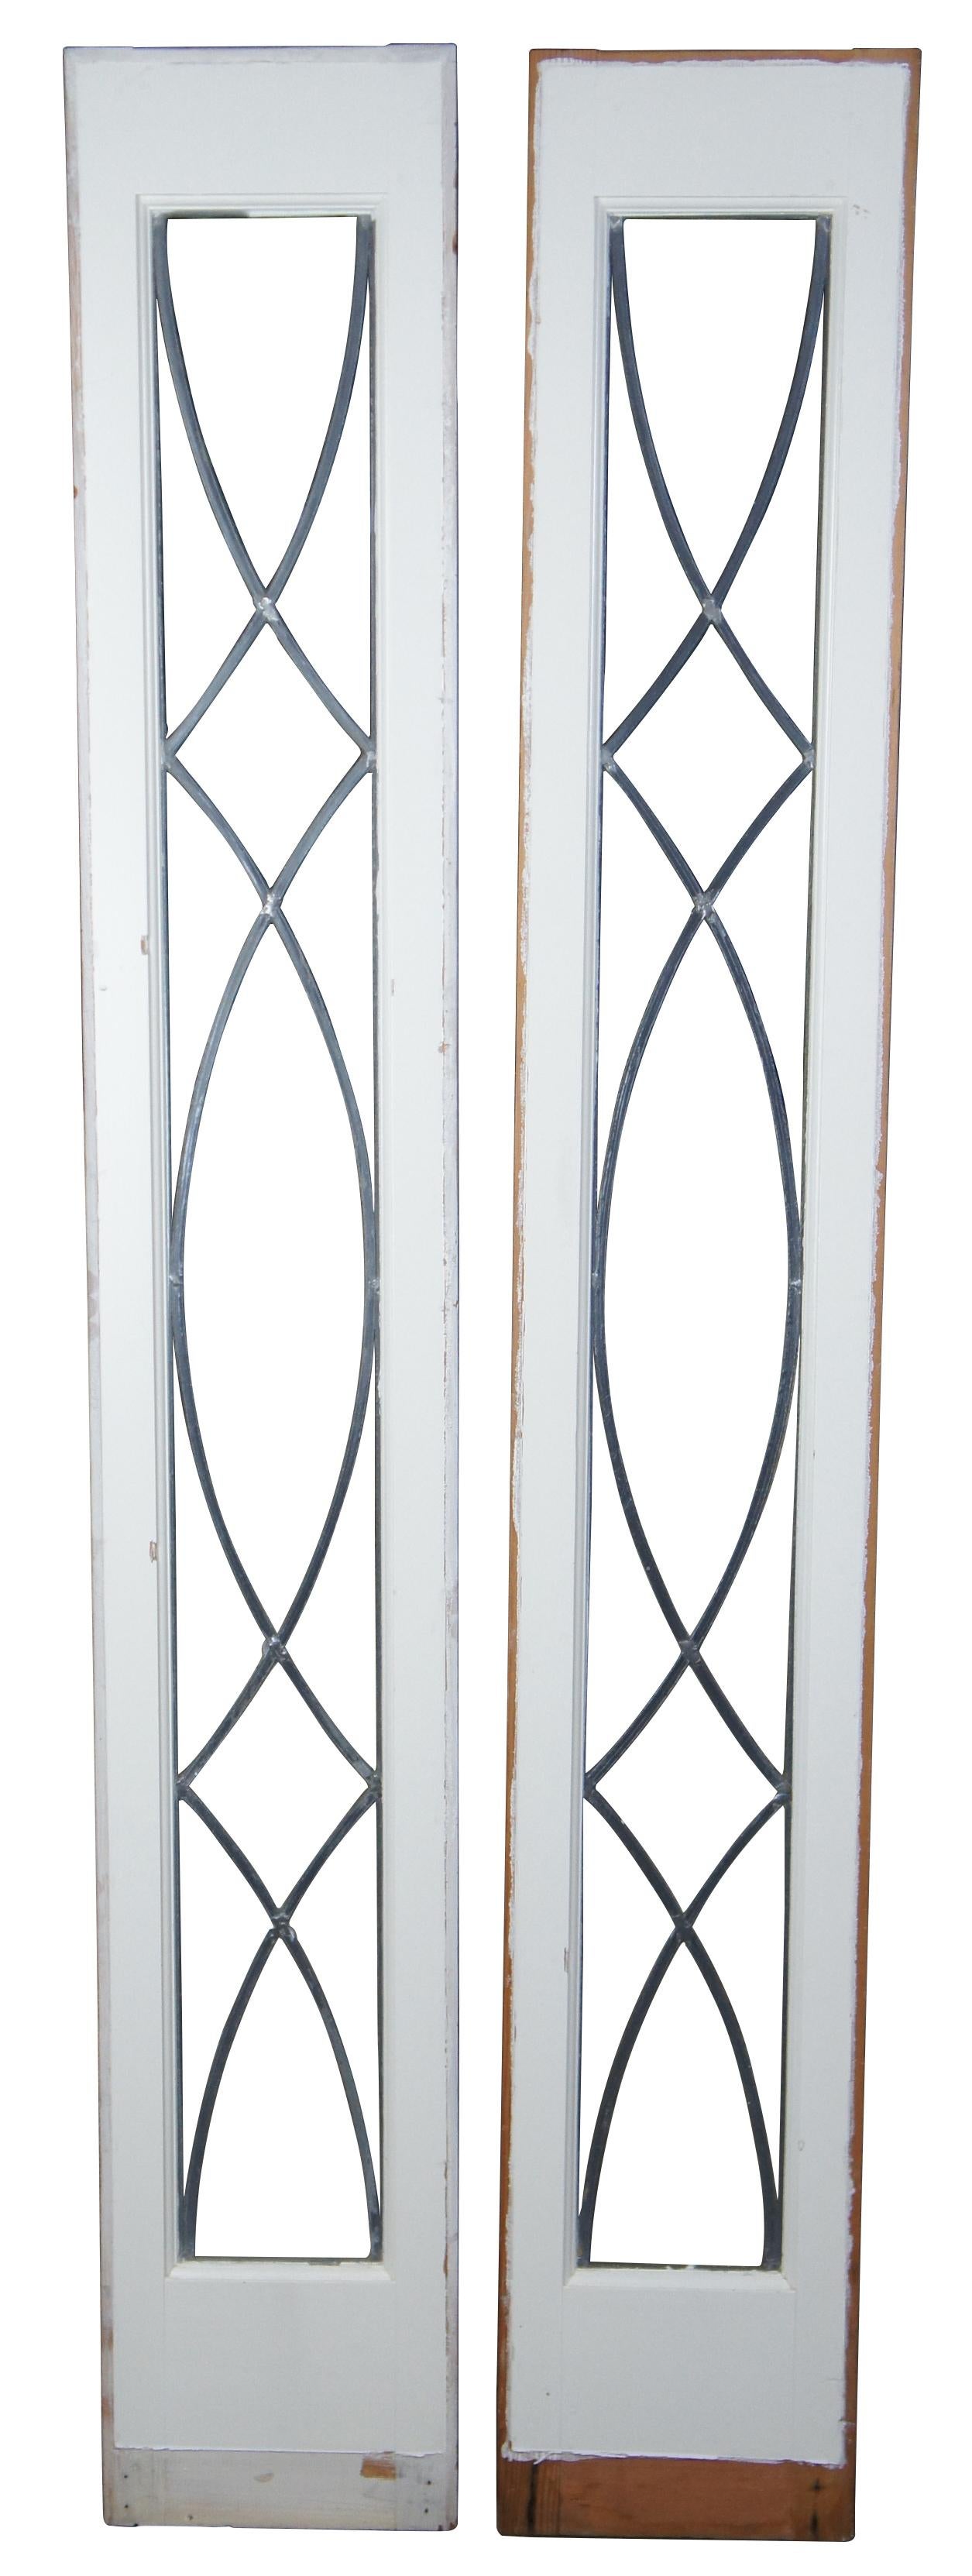 A beautiful pair of framed sidelight windows. Painted pine with graceful leaded design.
  